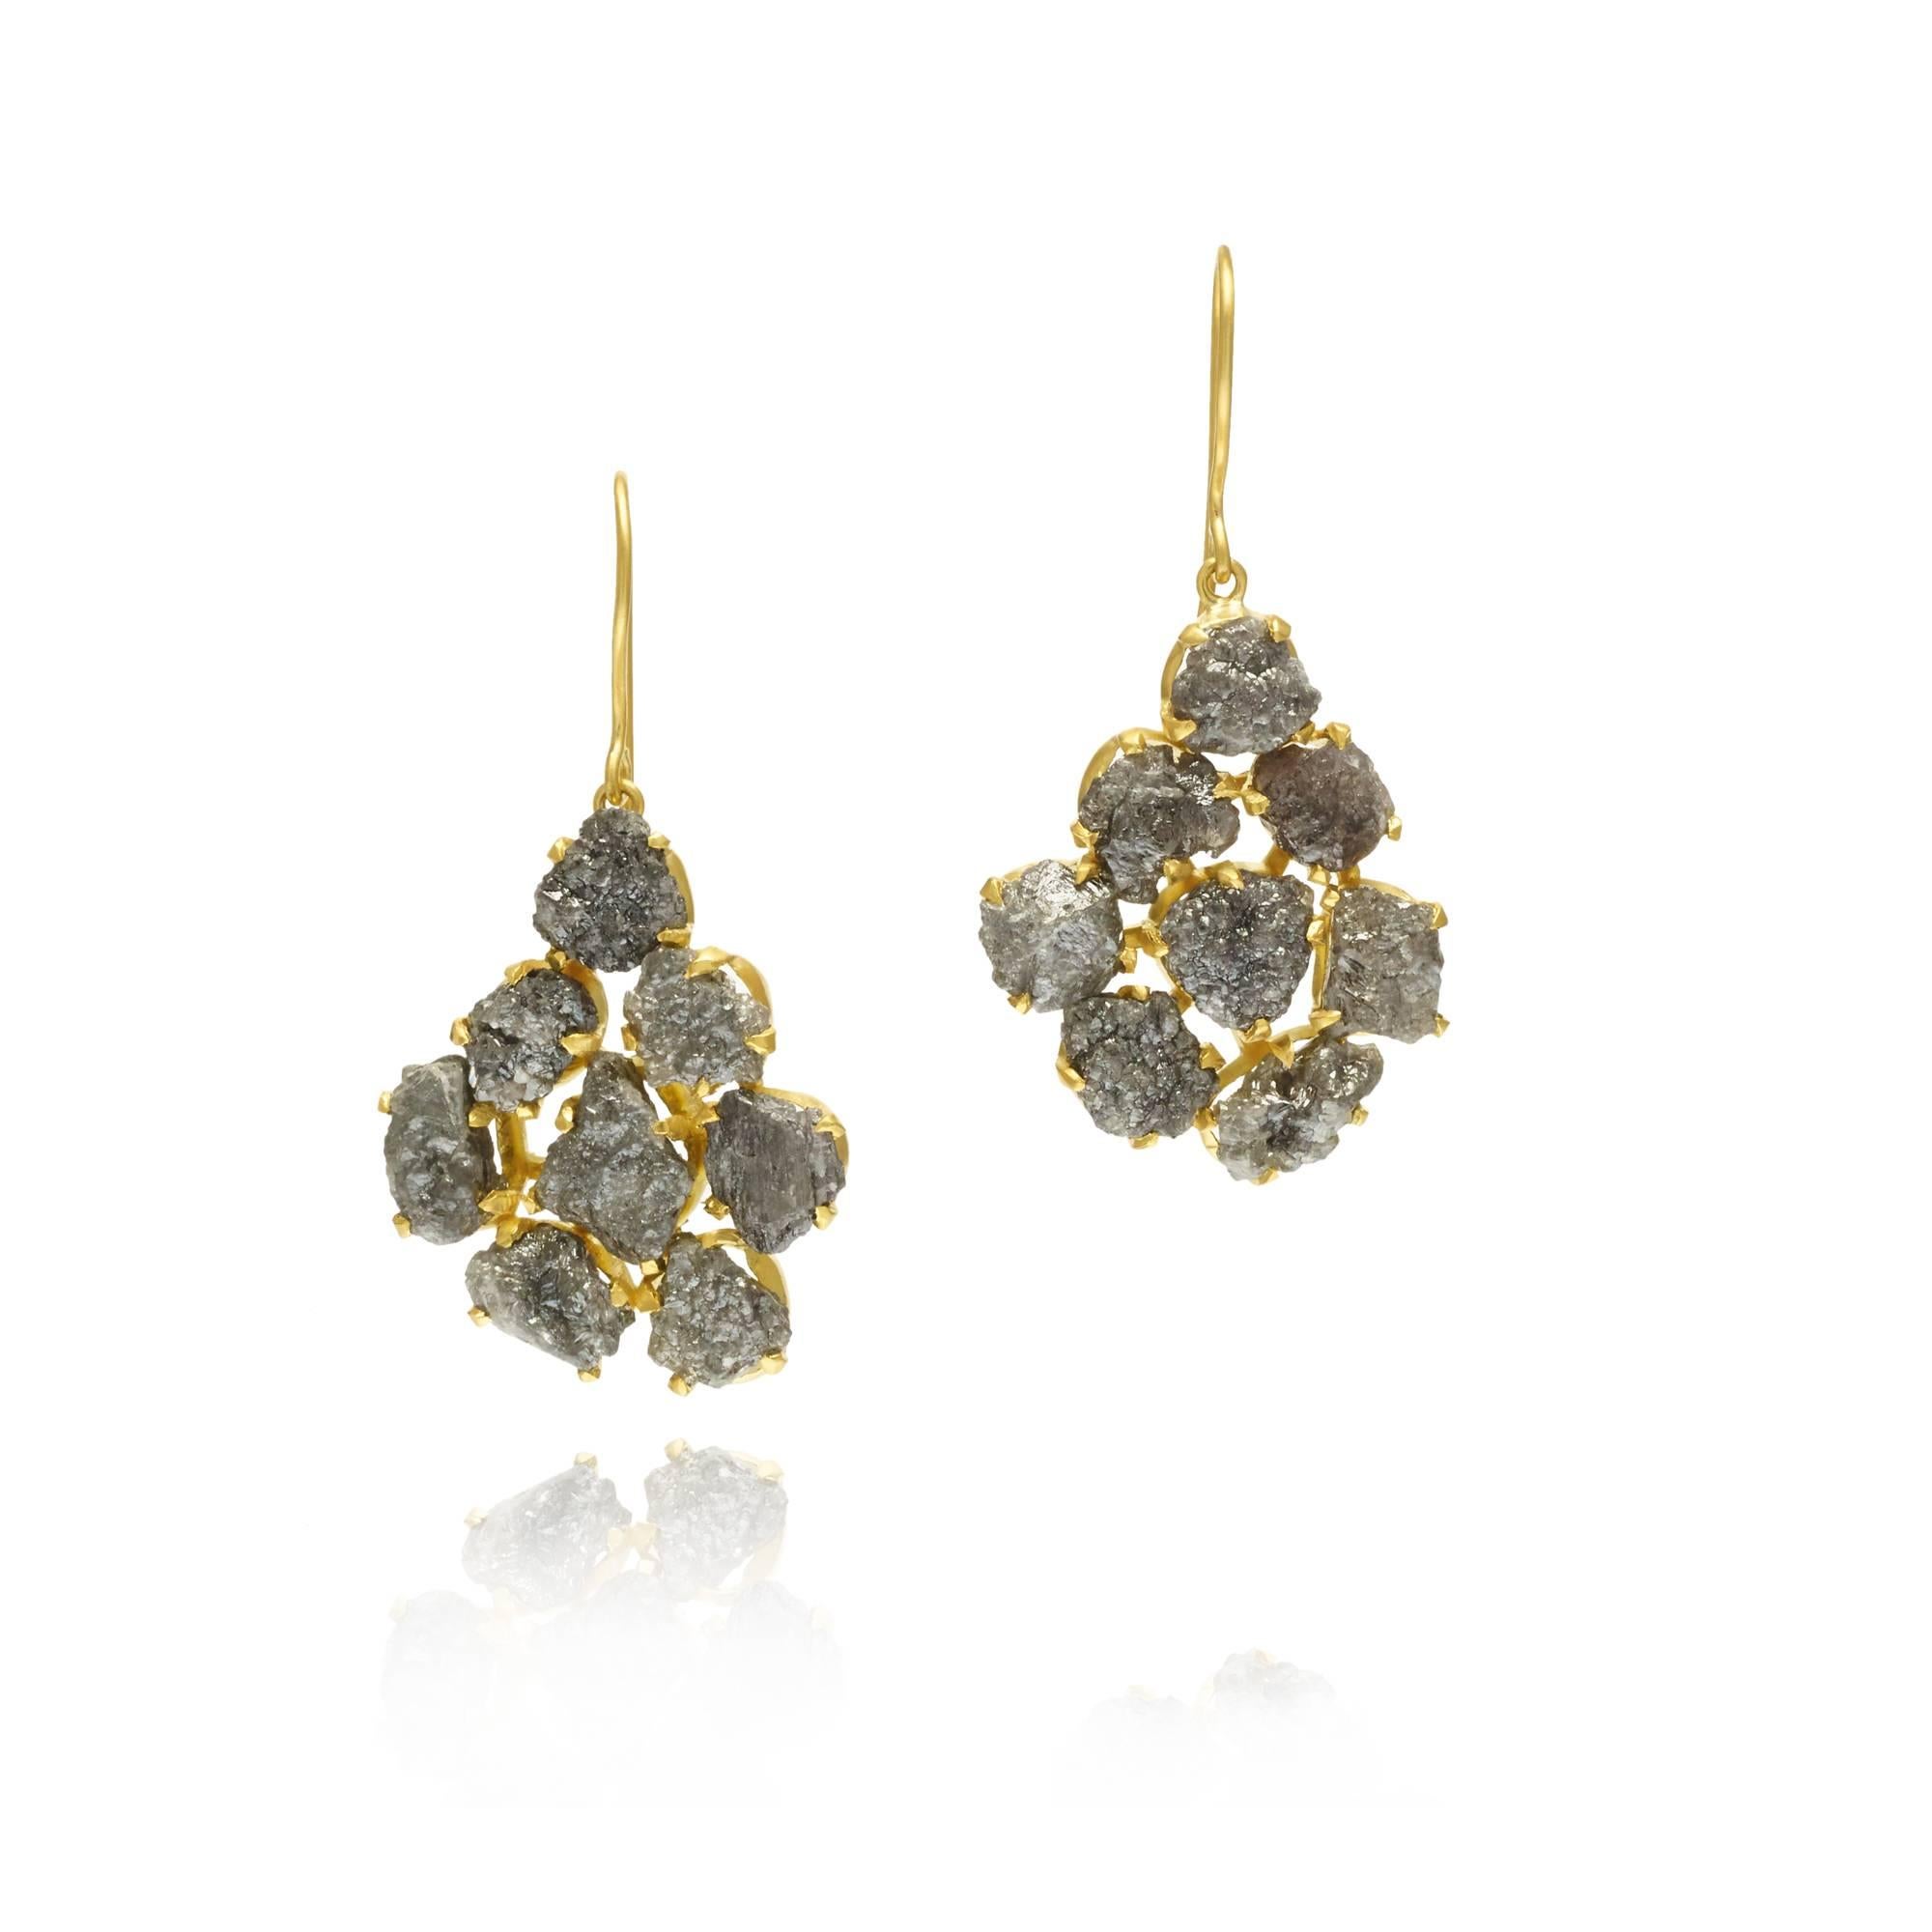 Evoking a quiet glamour of another era, the invisible collection combines the earthiness of uncut stones with the allure of sparkle. Differing from Pippa's traditional colette setting, each Diamond featured in these earrings is held by a delicate